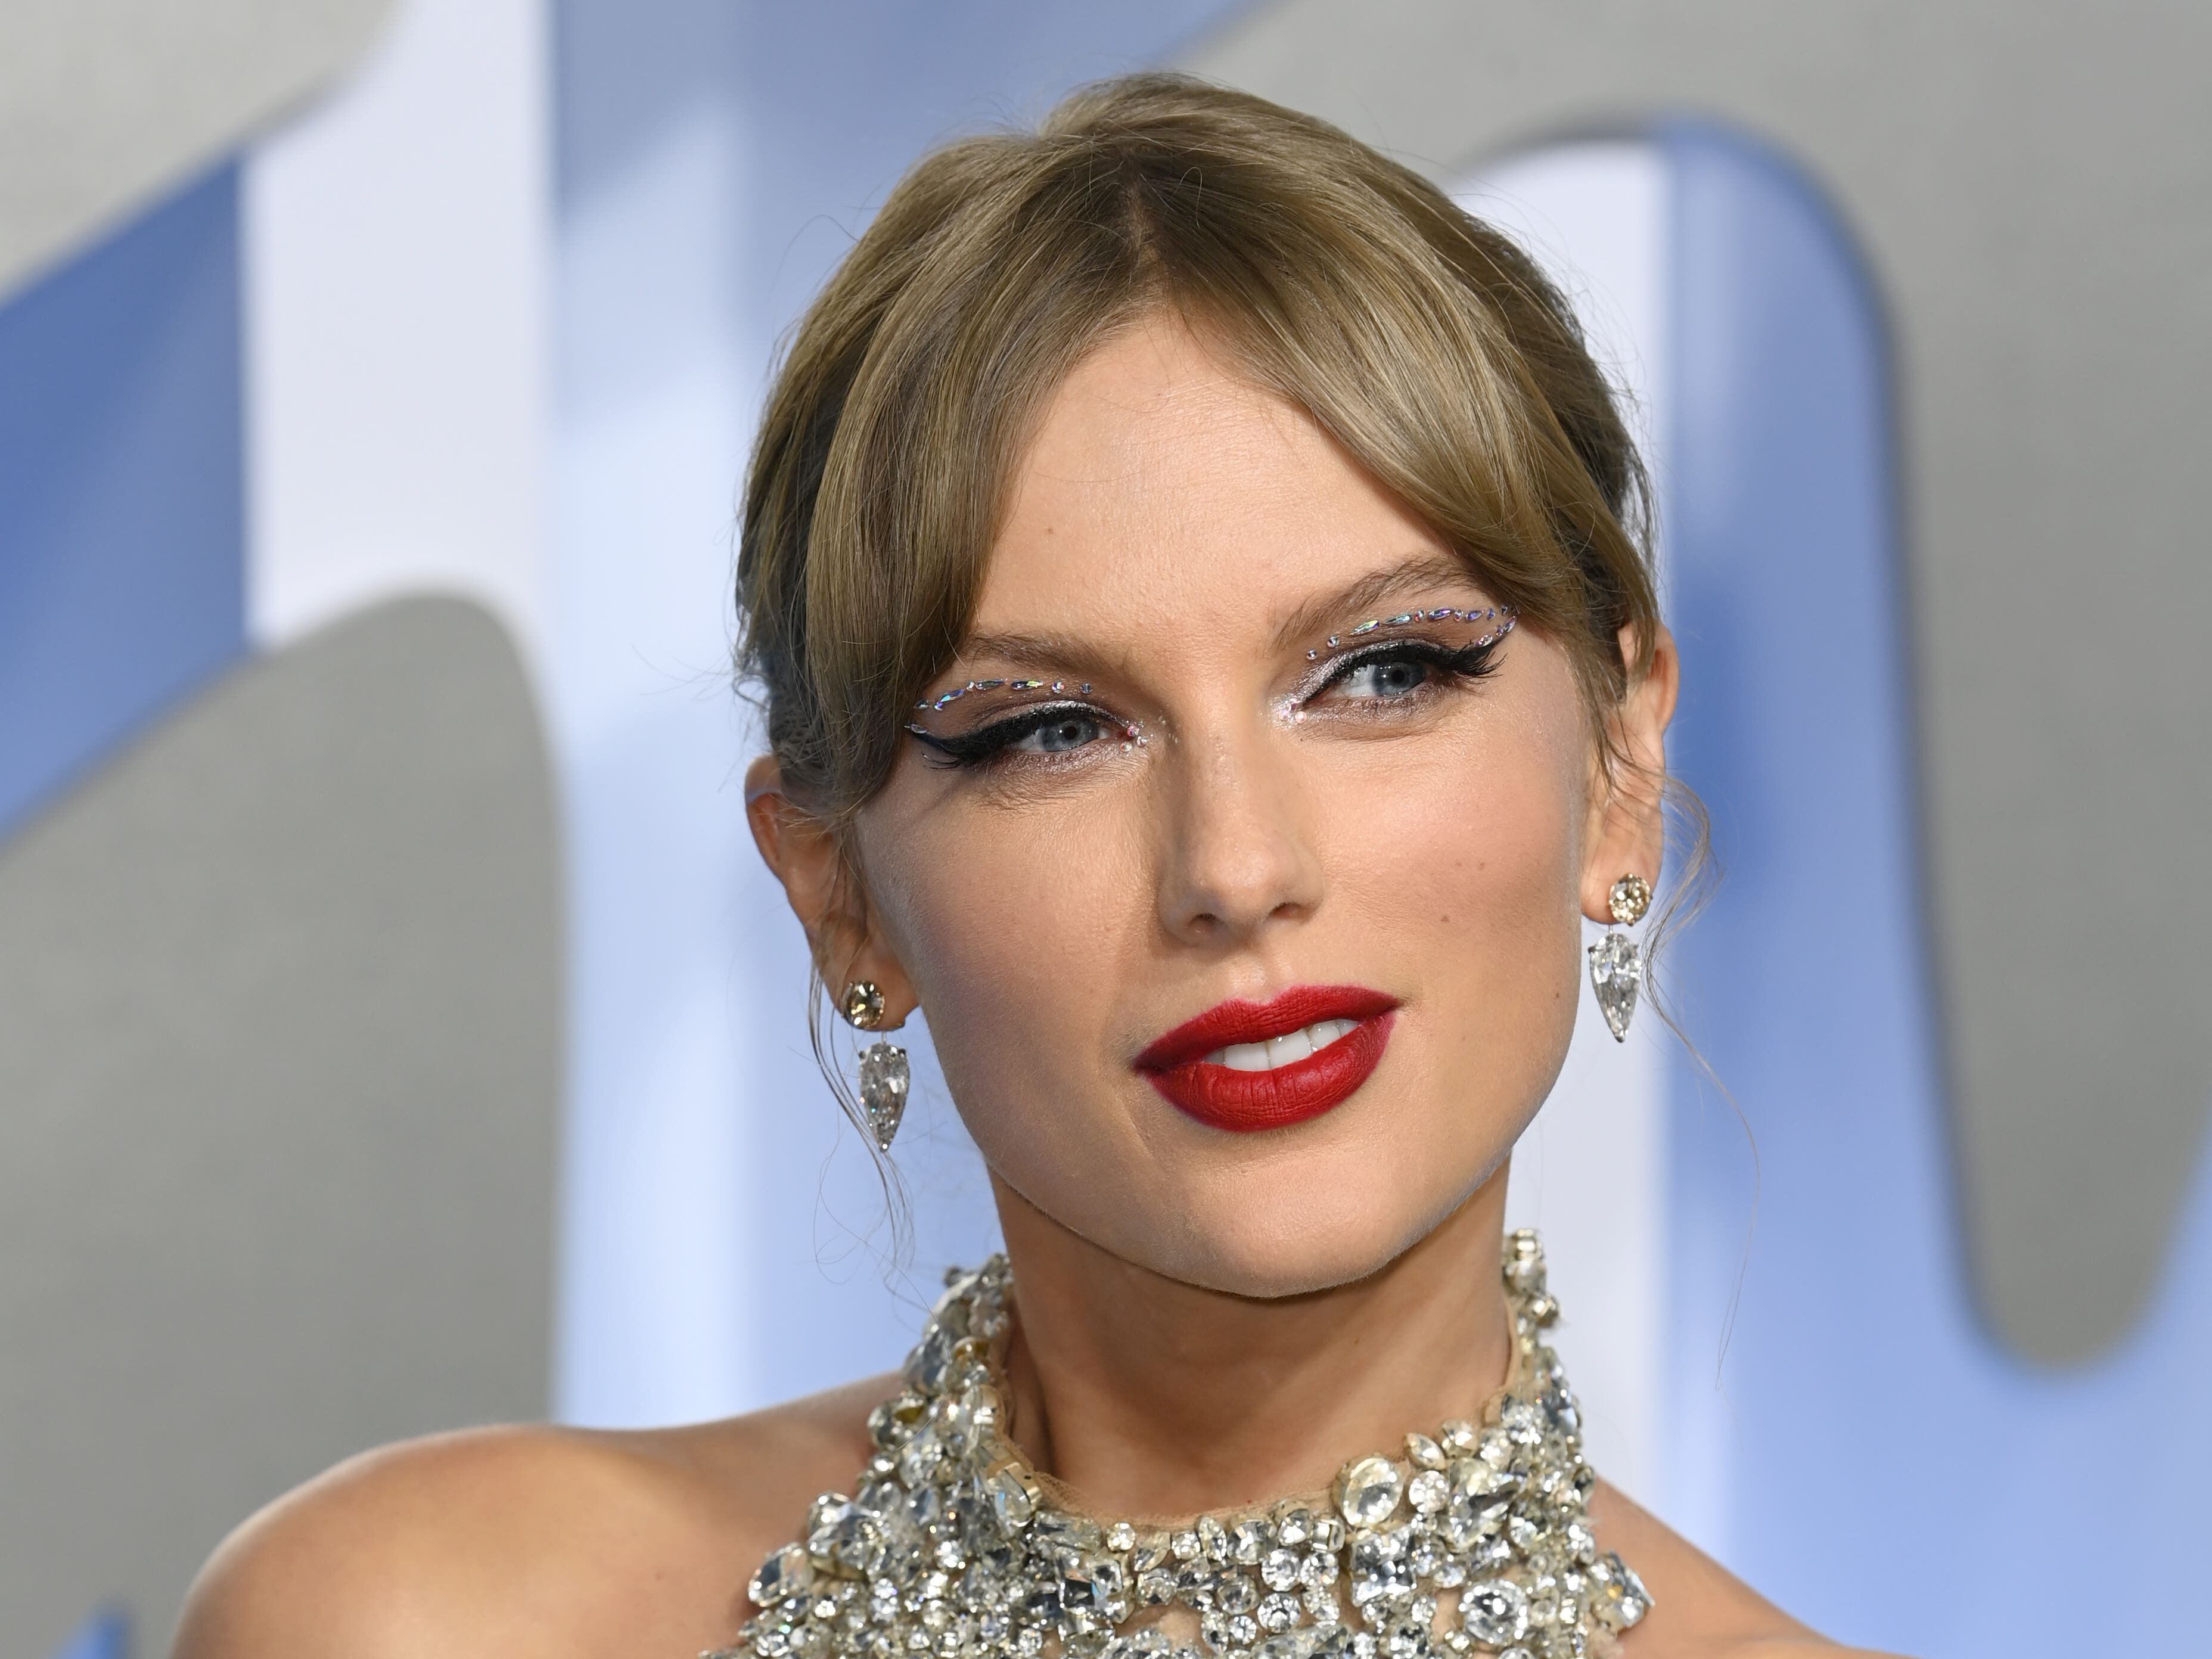 Taylor Swift tipped for first number one of 2023 with album Midnights